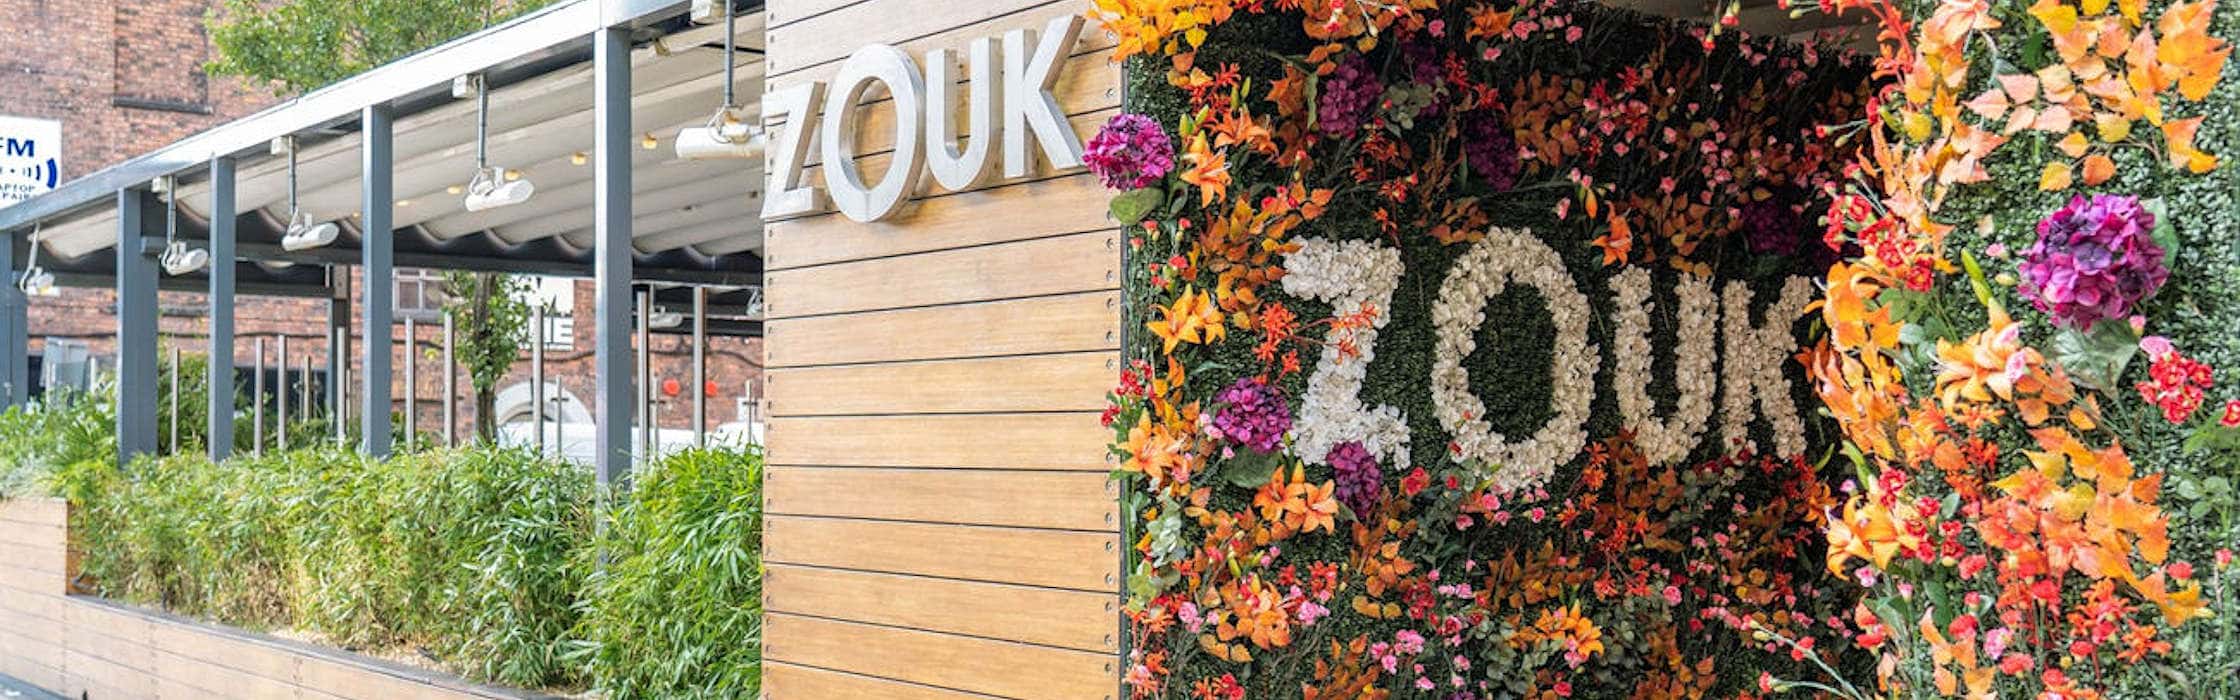 What's On at The Zouk Tea Bar and Grill, Manchester